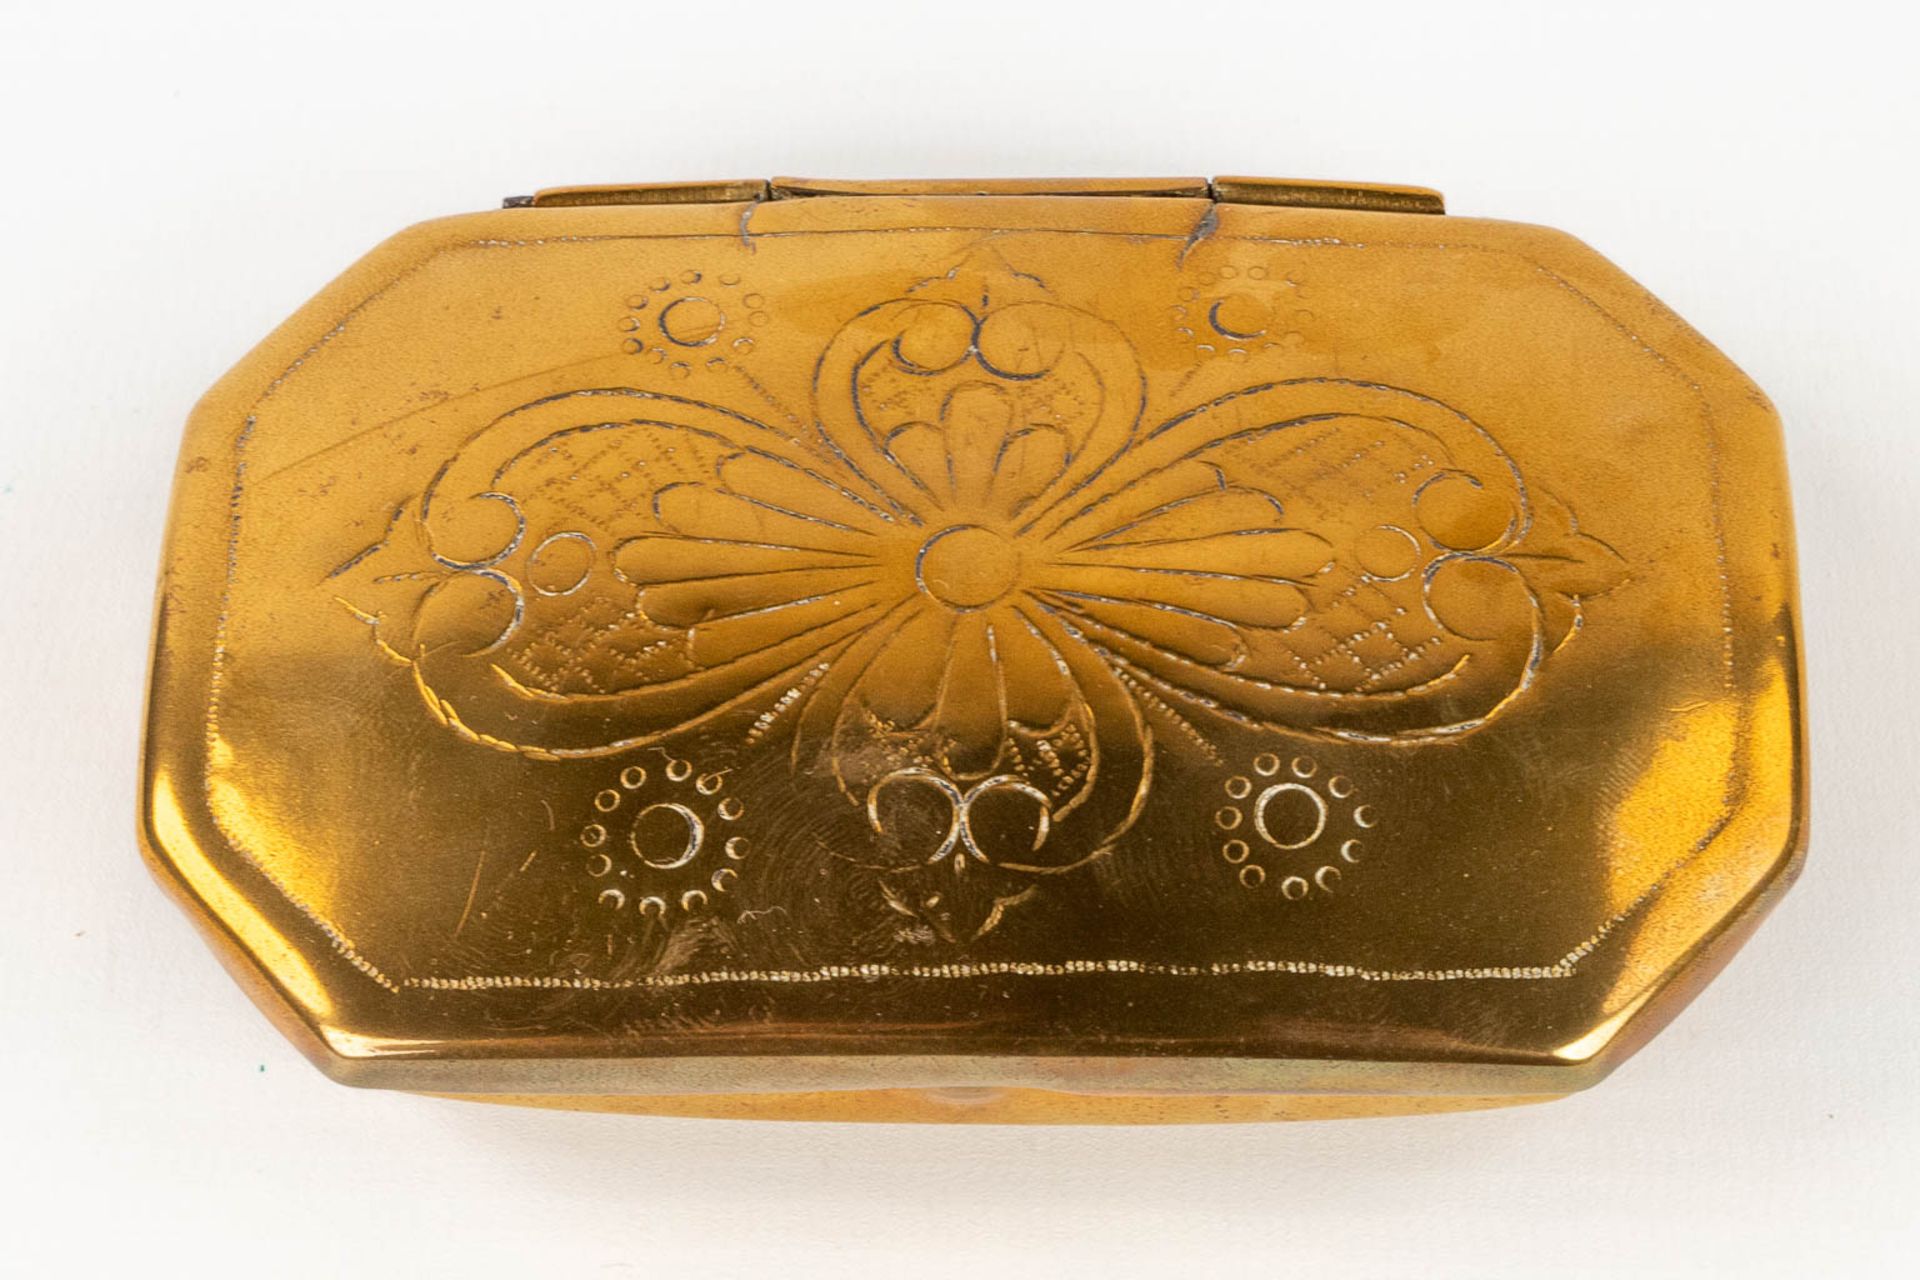 A collection of 3 antique oval tobacco boxes, made of copper. 18th/19th C. (L: 7 x W: 12 x H: 3,5 cm - Image 5 of 13